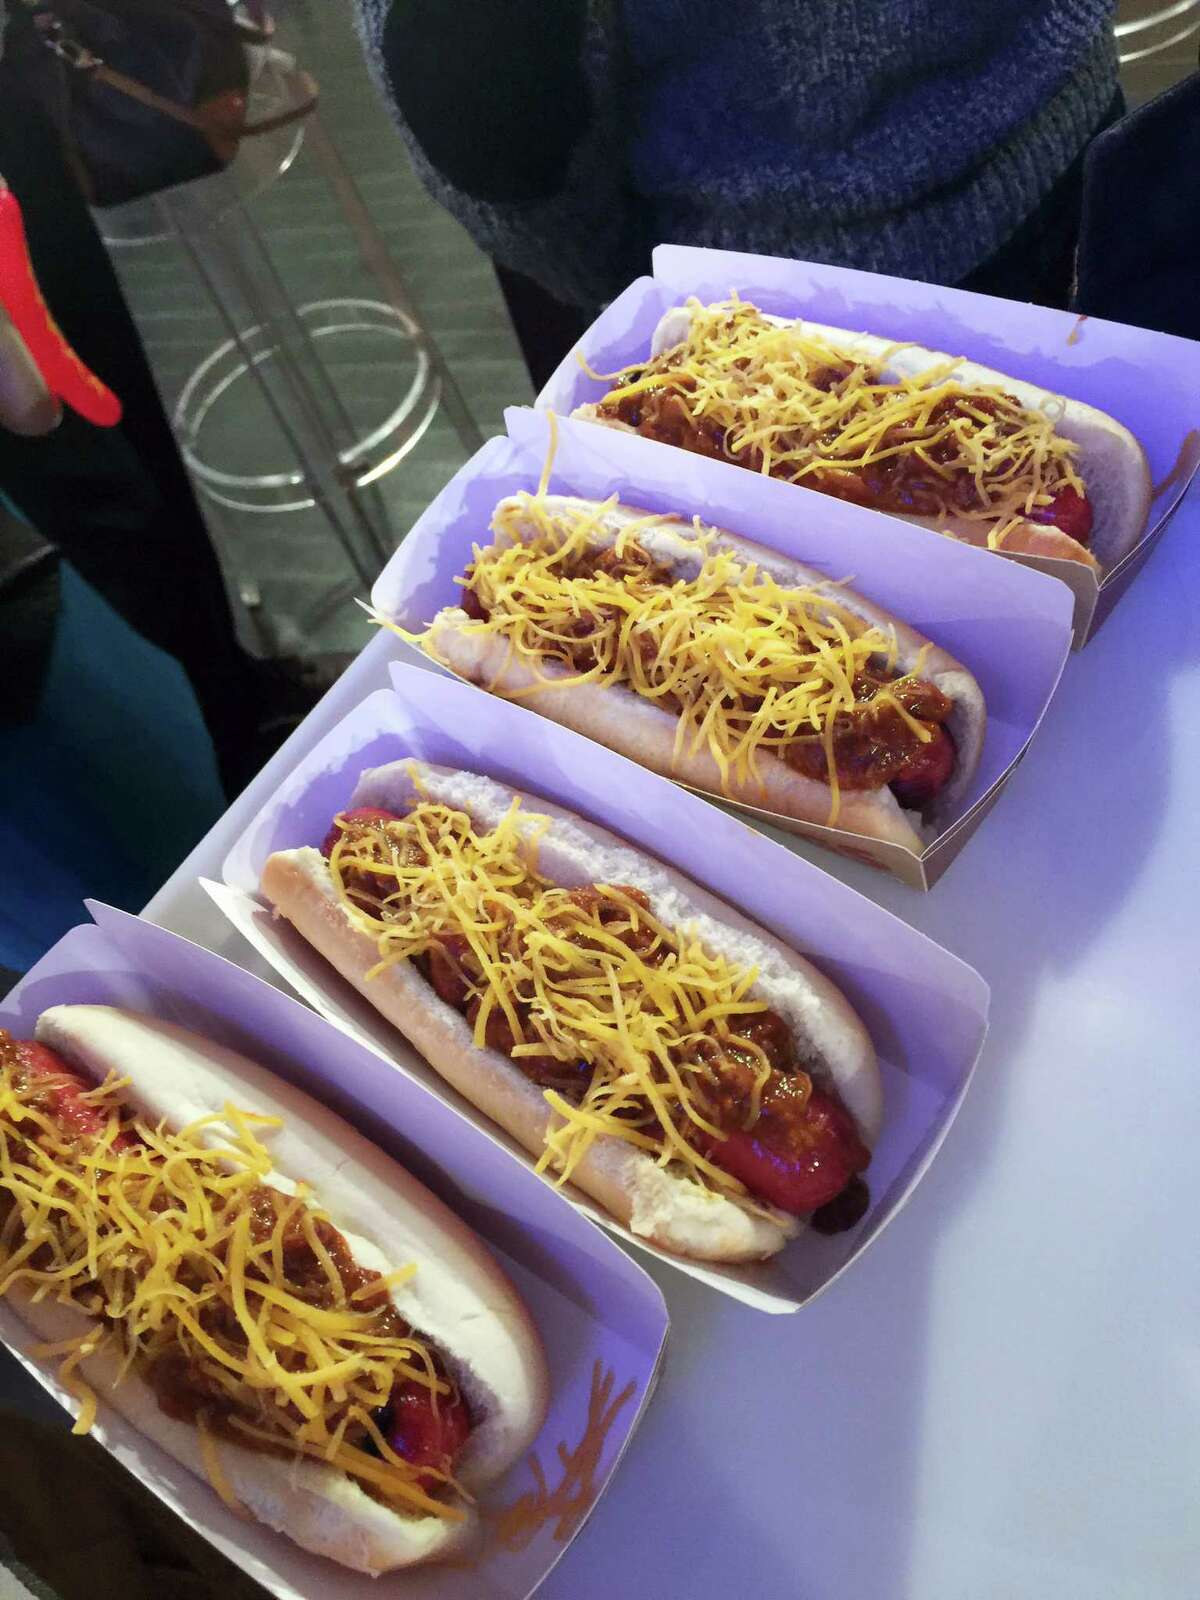 Burger King “chili cheese” hot dogs.